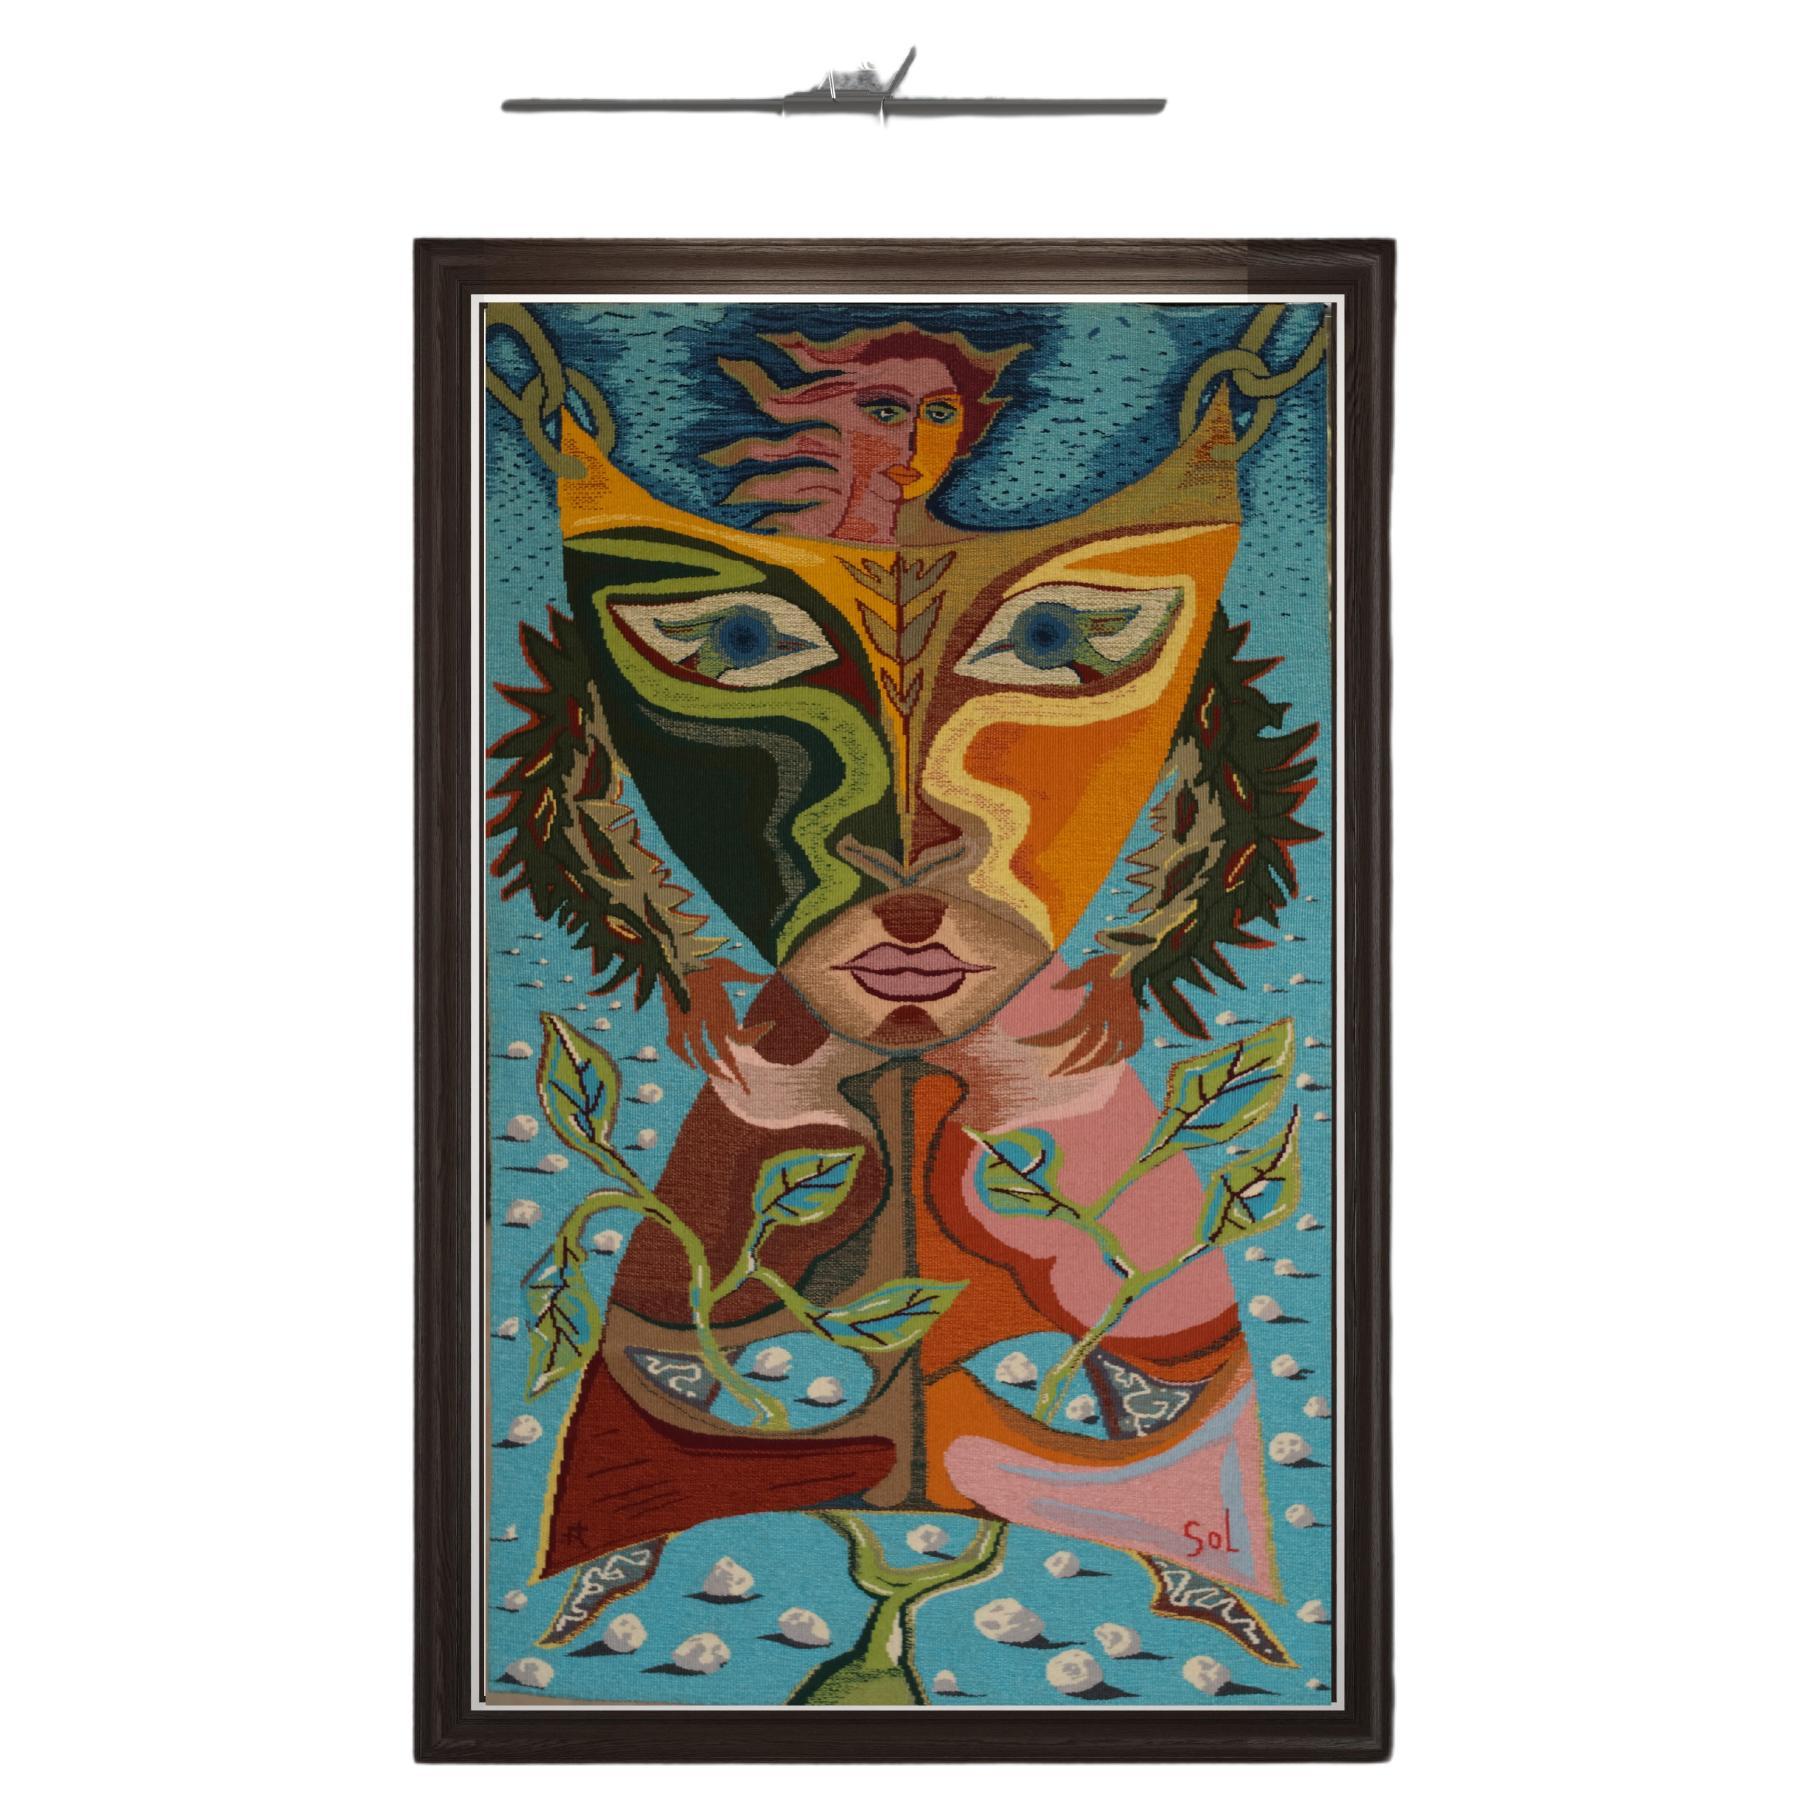 Captivating 'Mascarade' High-Loom Tapestry by David Sol, 1989 - Single Edition For Sale